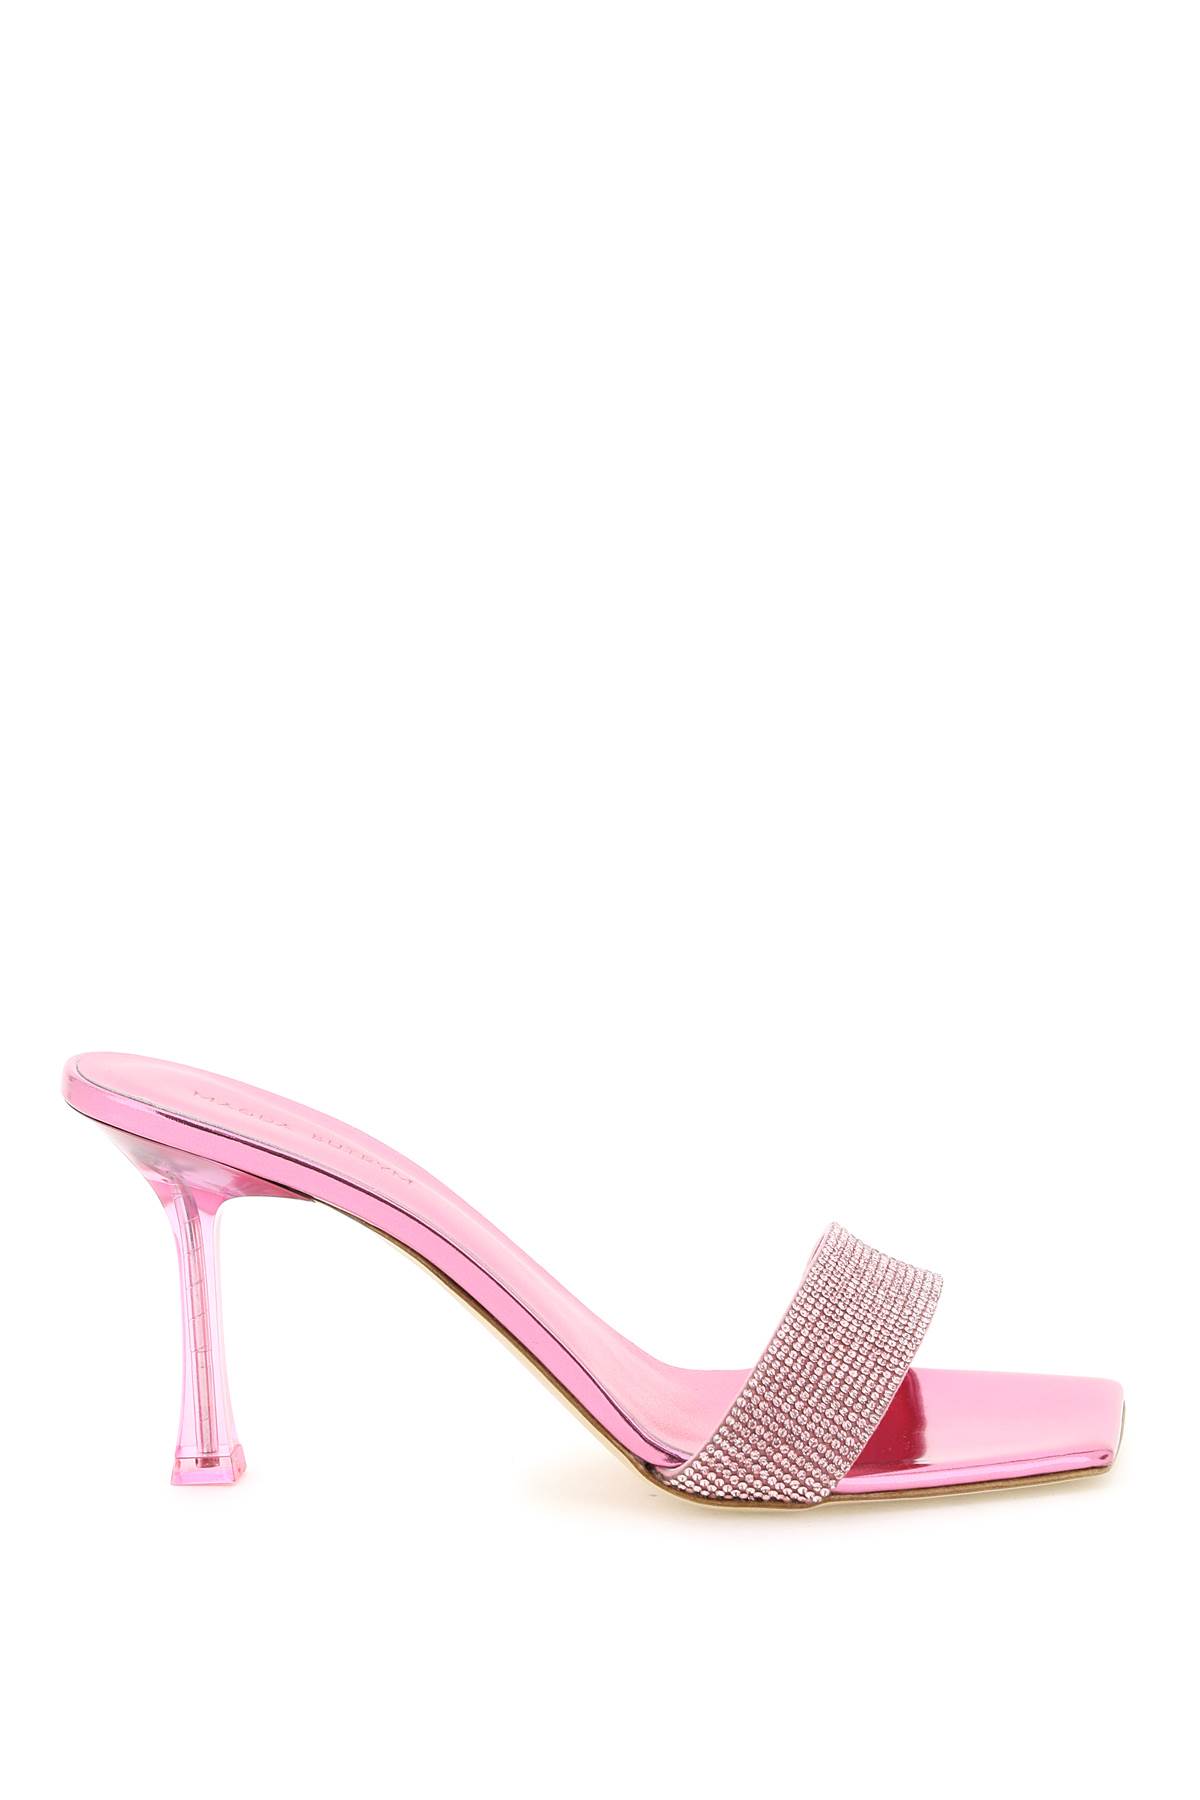 Shop Magda Butrym Mules With Rhinestones In Pink Strap (pink)